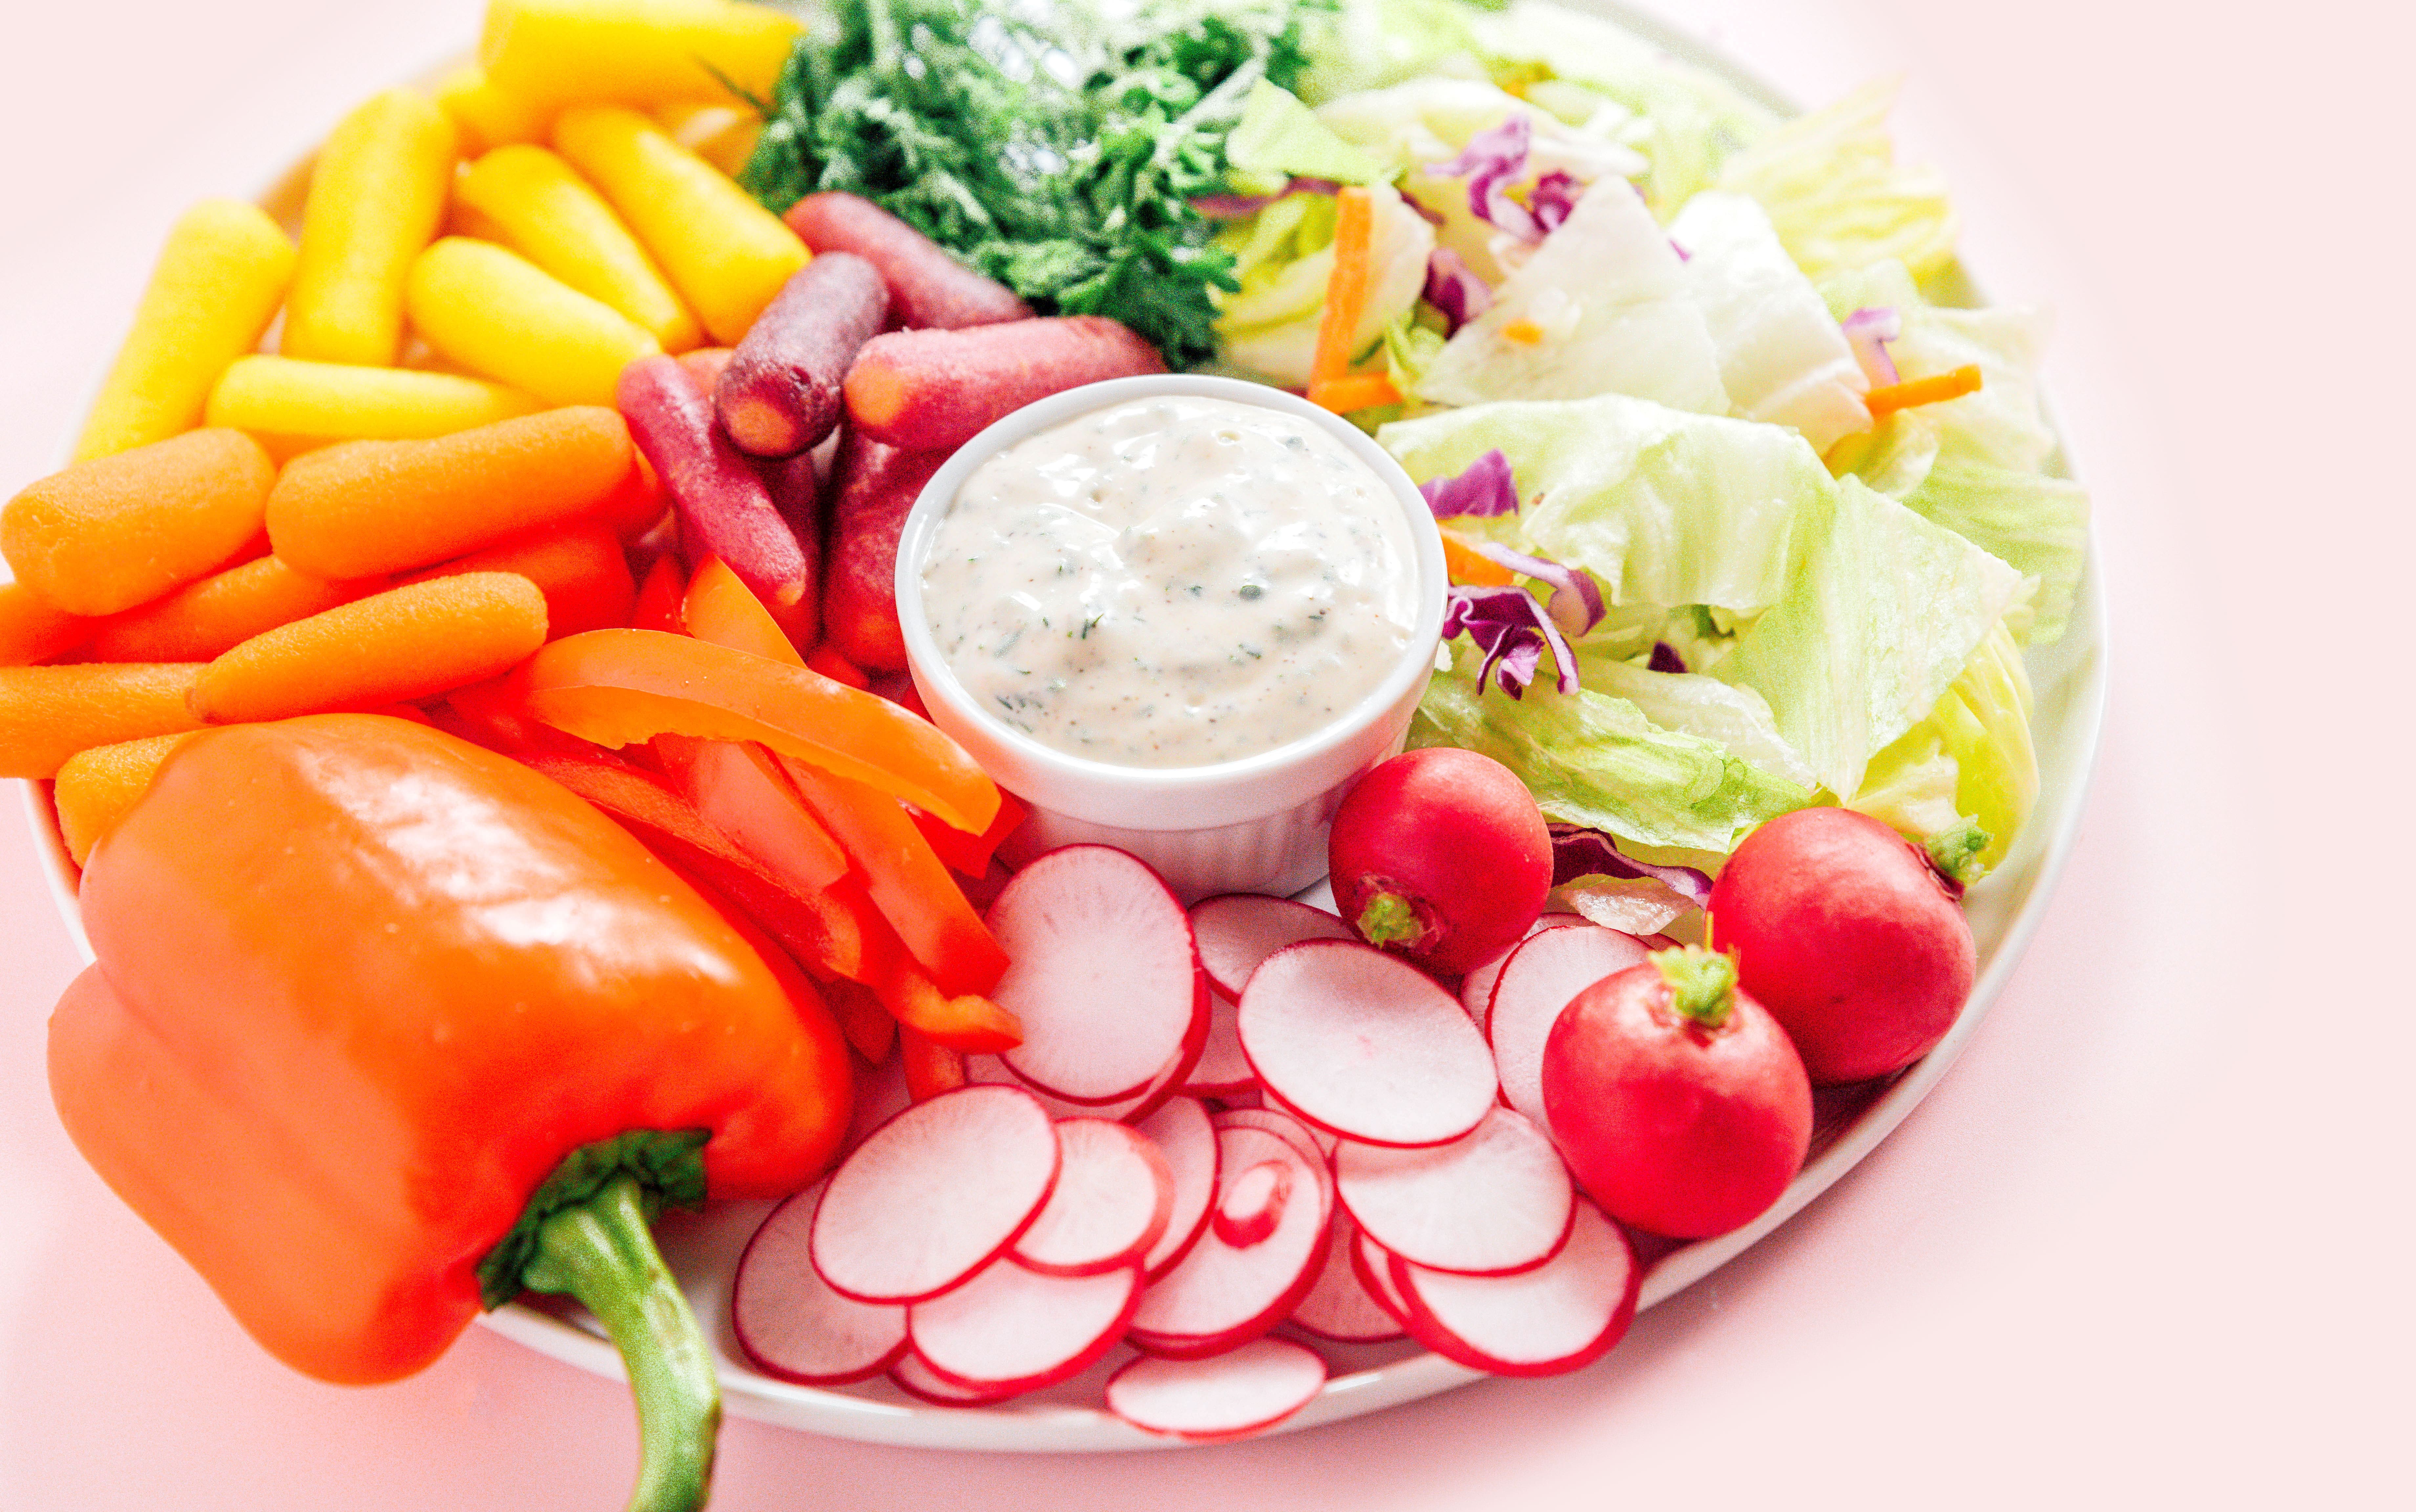 A platter filled with a bowl of vegan ranch dressing surrounded by veggies like peppers, carrots, radishes, lettuce, and more